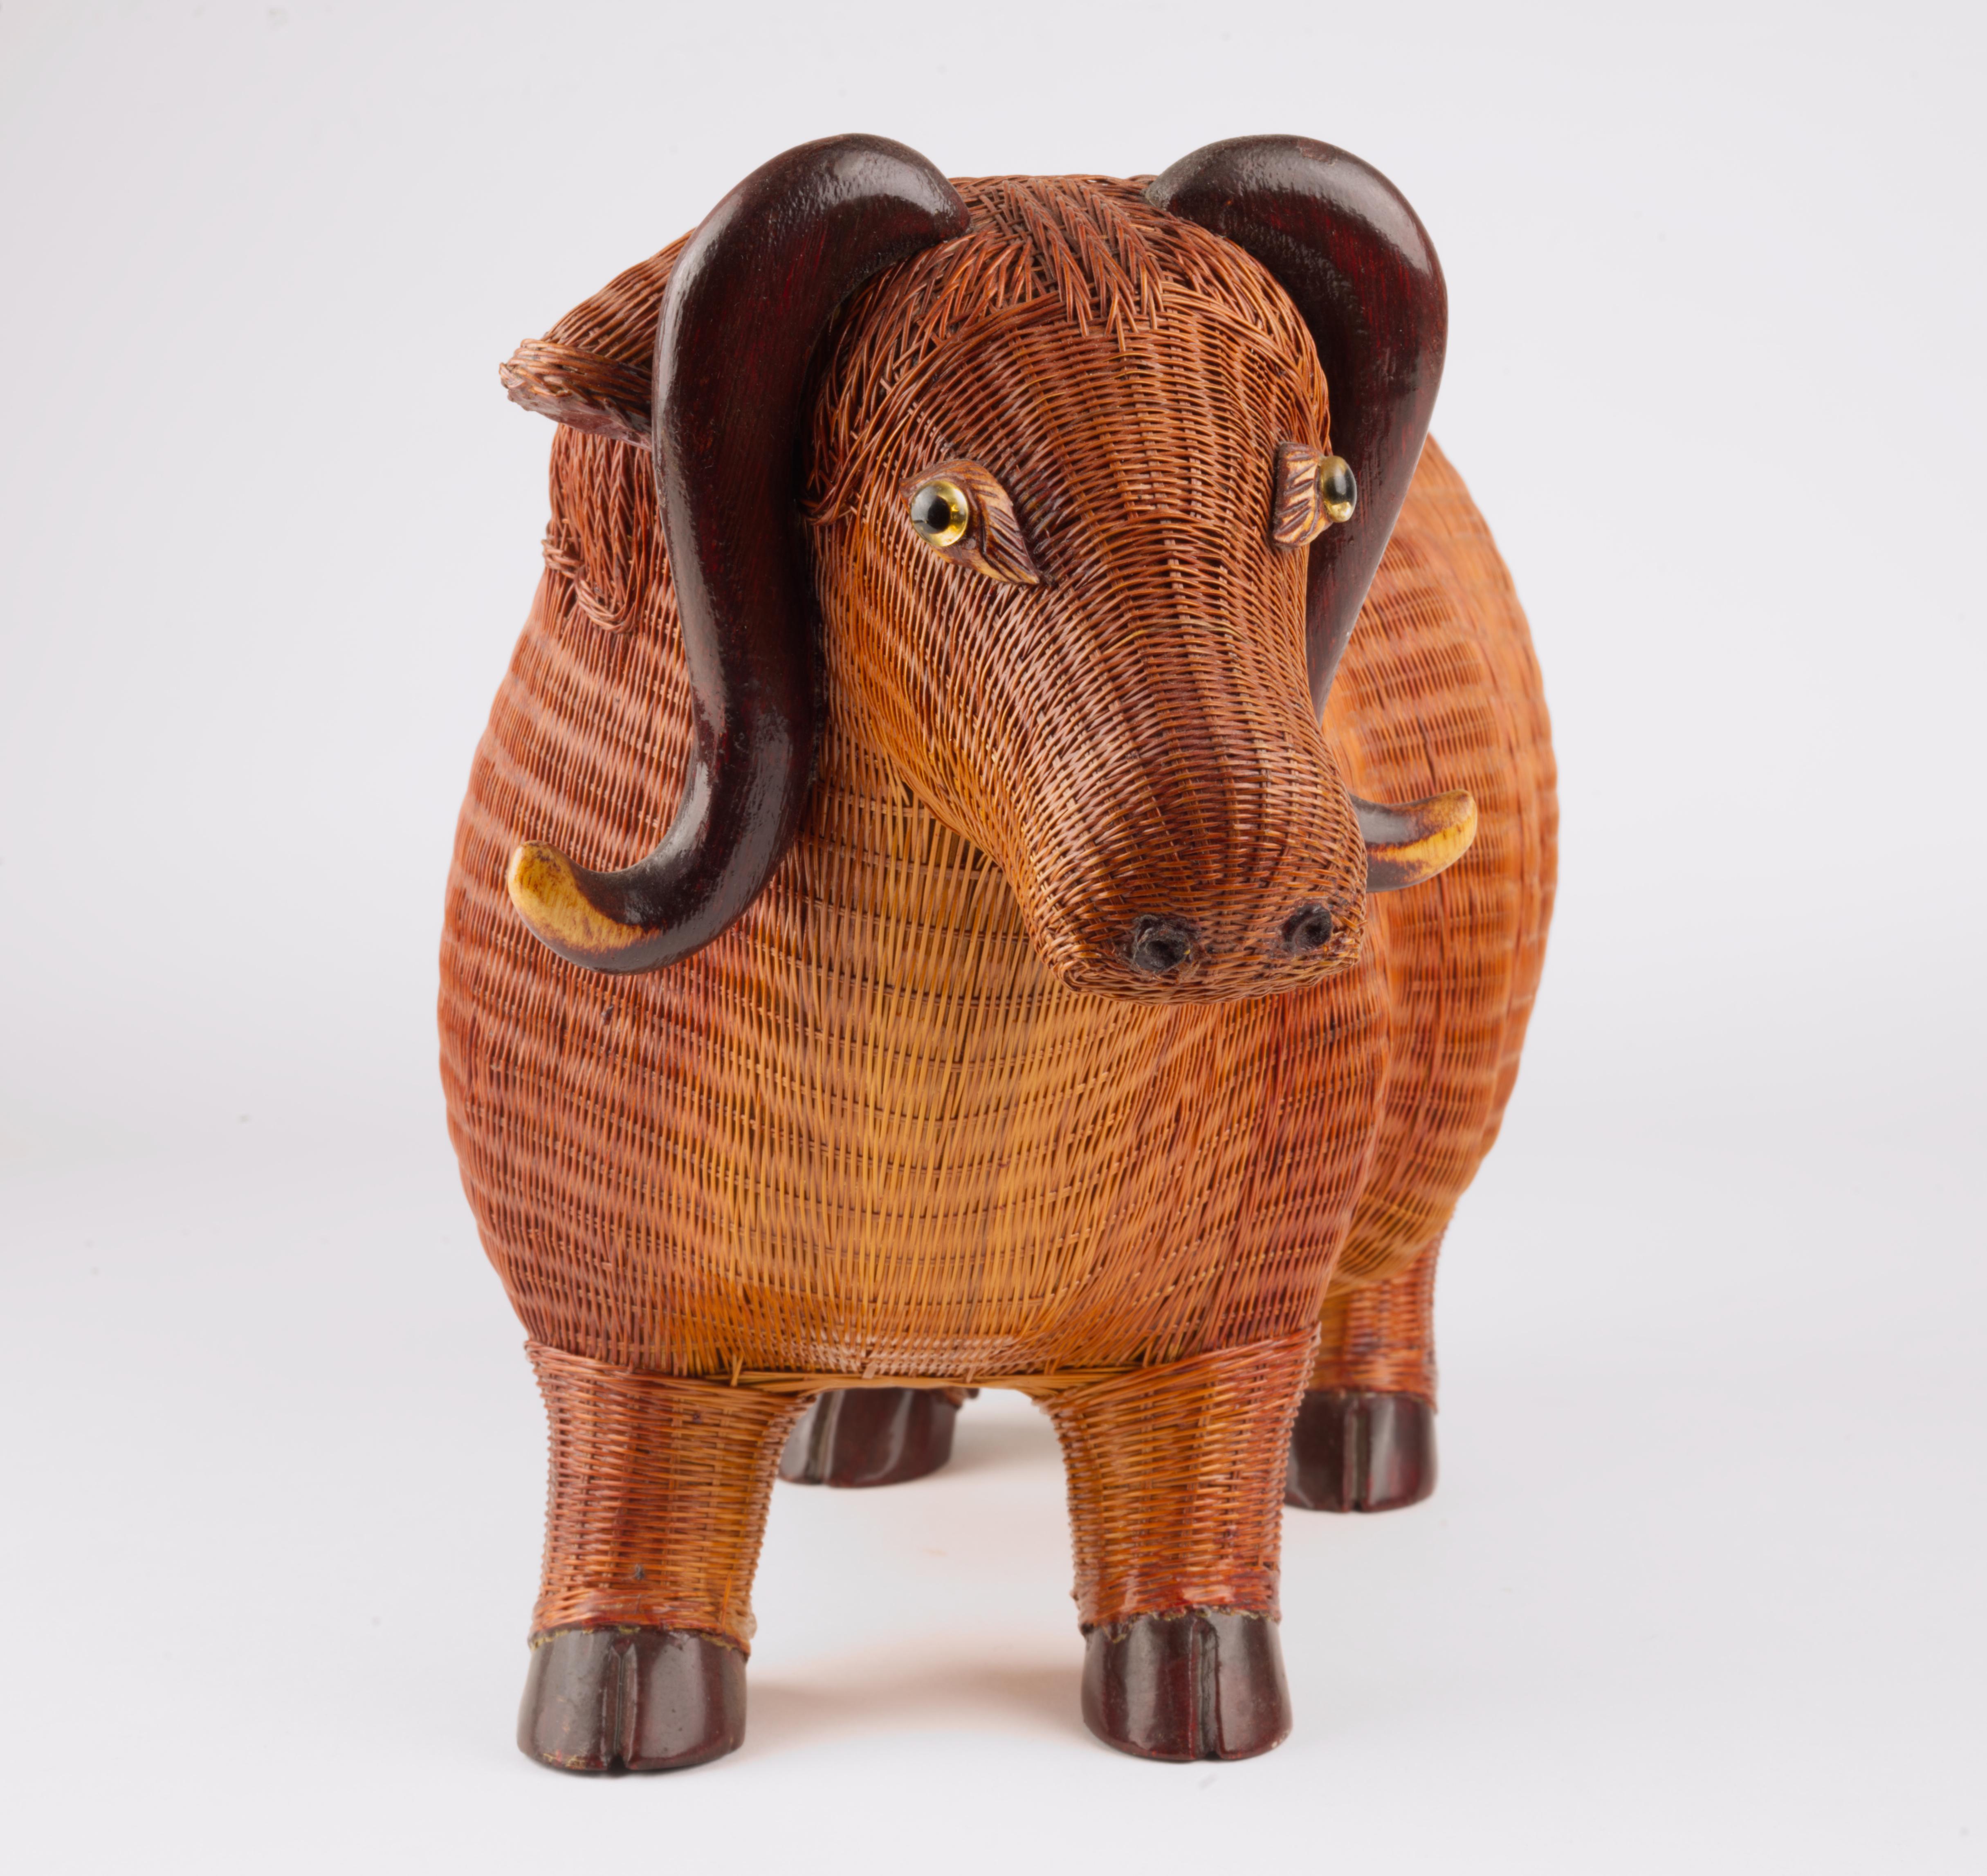  A highly detailed, sculptural water buffalo figurine was hand made in finely woven lightweight honey-brown wicker which was then lacquered, with carved wood feet and horns and clear and black glass eyes, by Shanghai Handicrafts Collection.

The